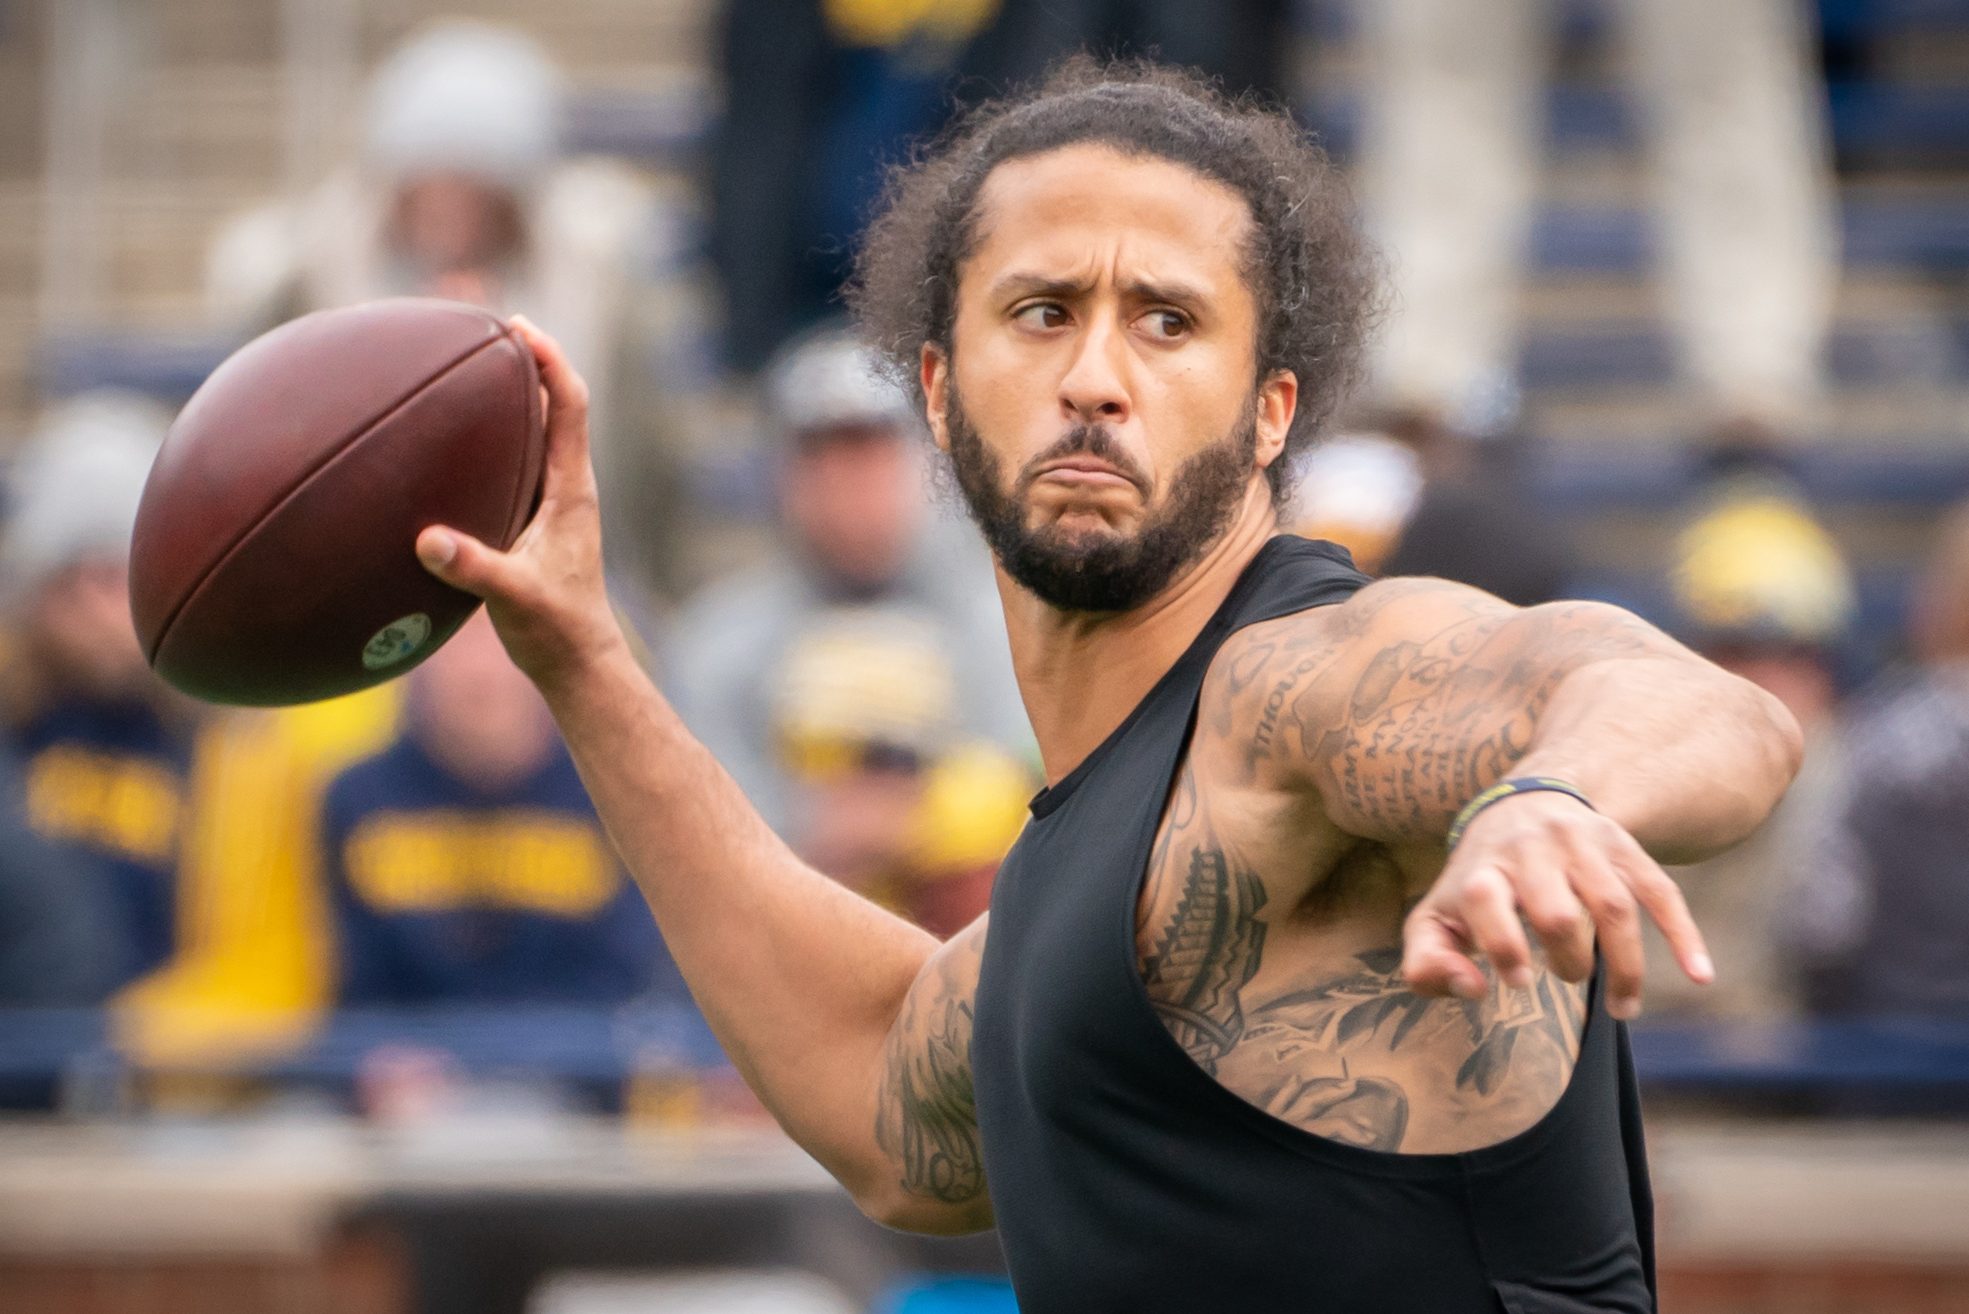 Colin Kaepernick's Workout With Las Vegas Was a 'Disaster,' Ex-Raider Says  - InsideHook